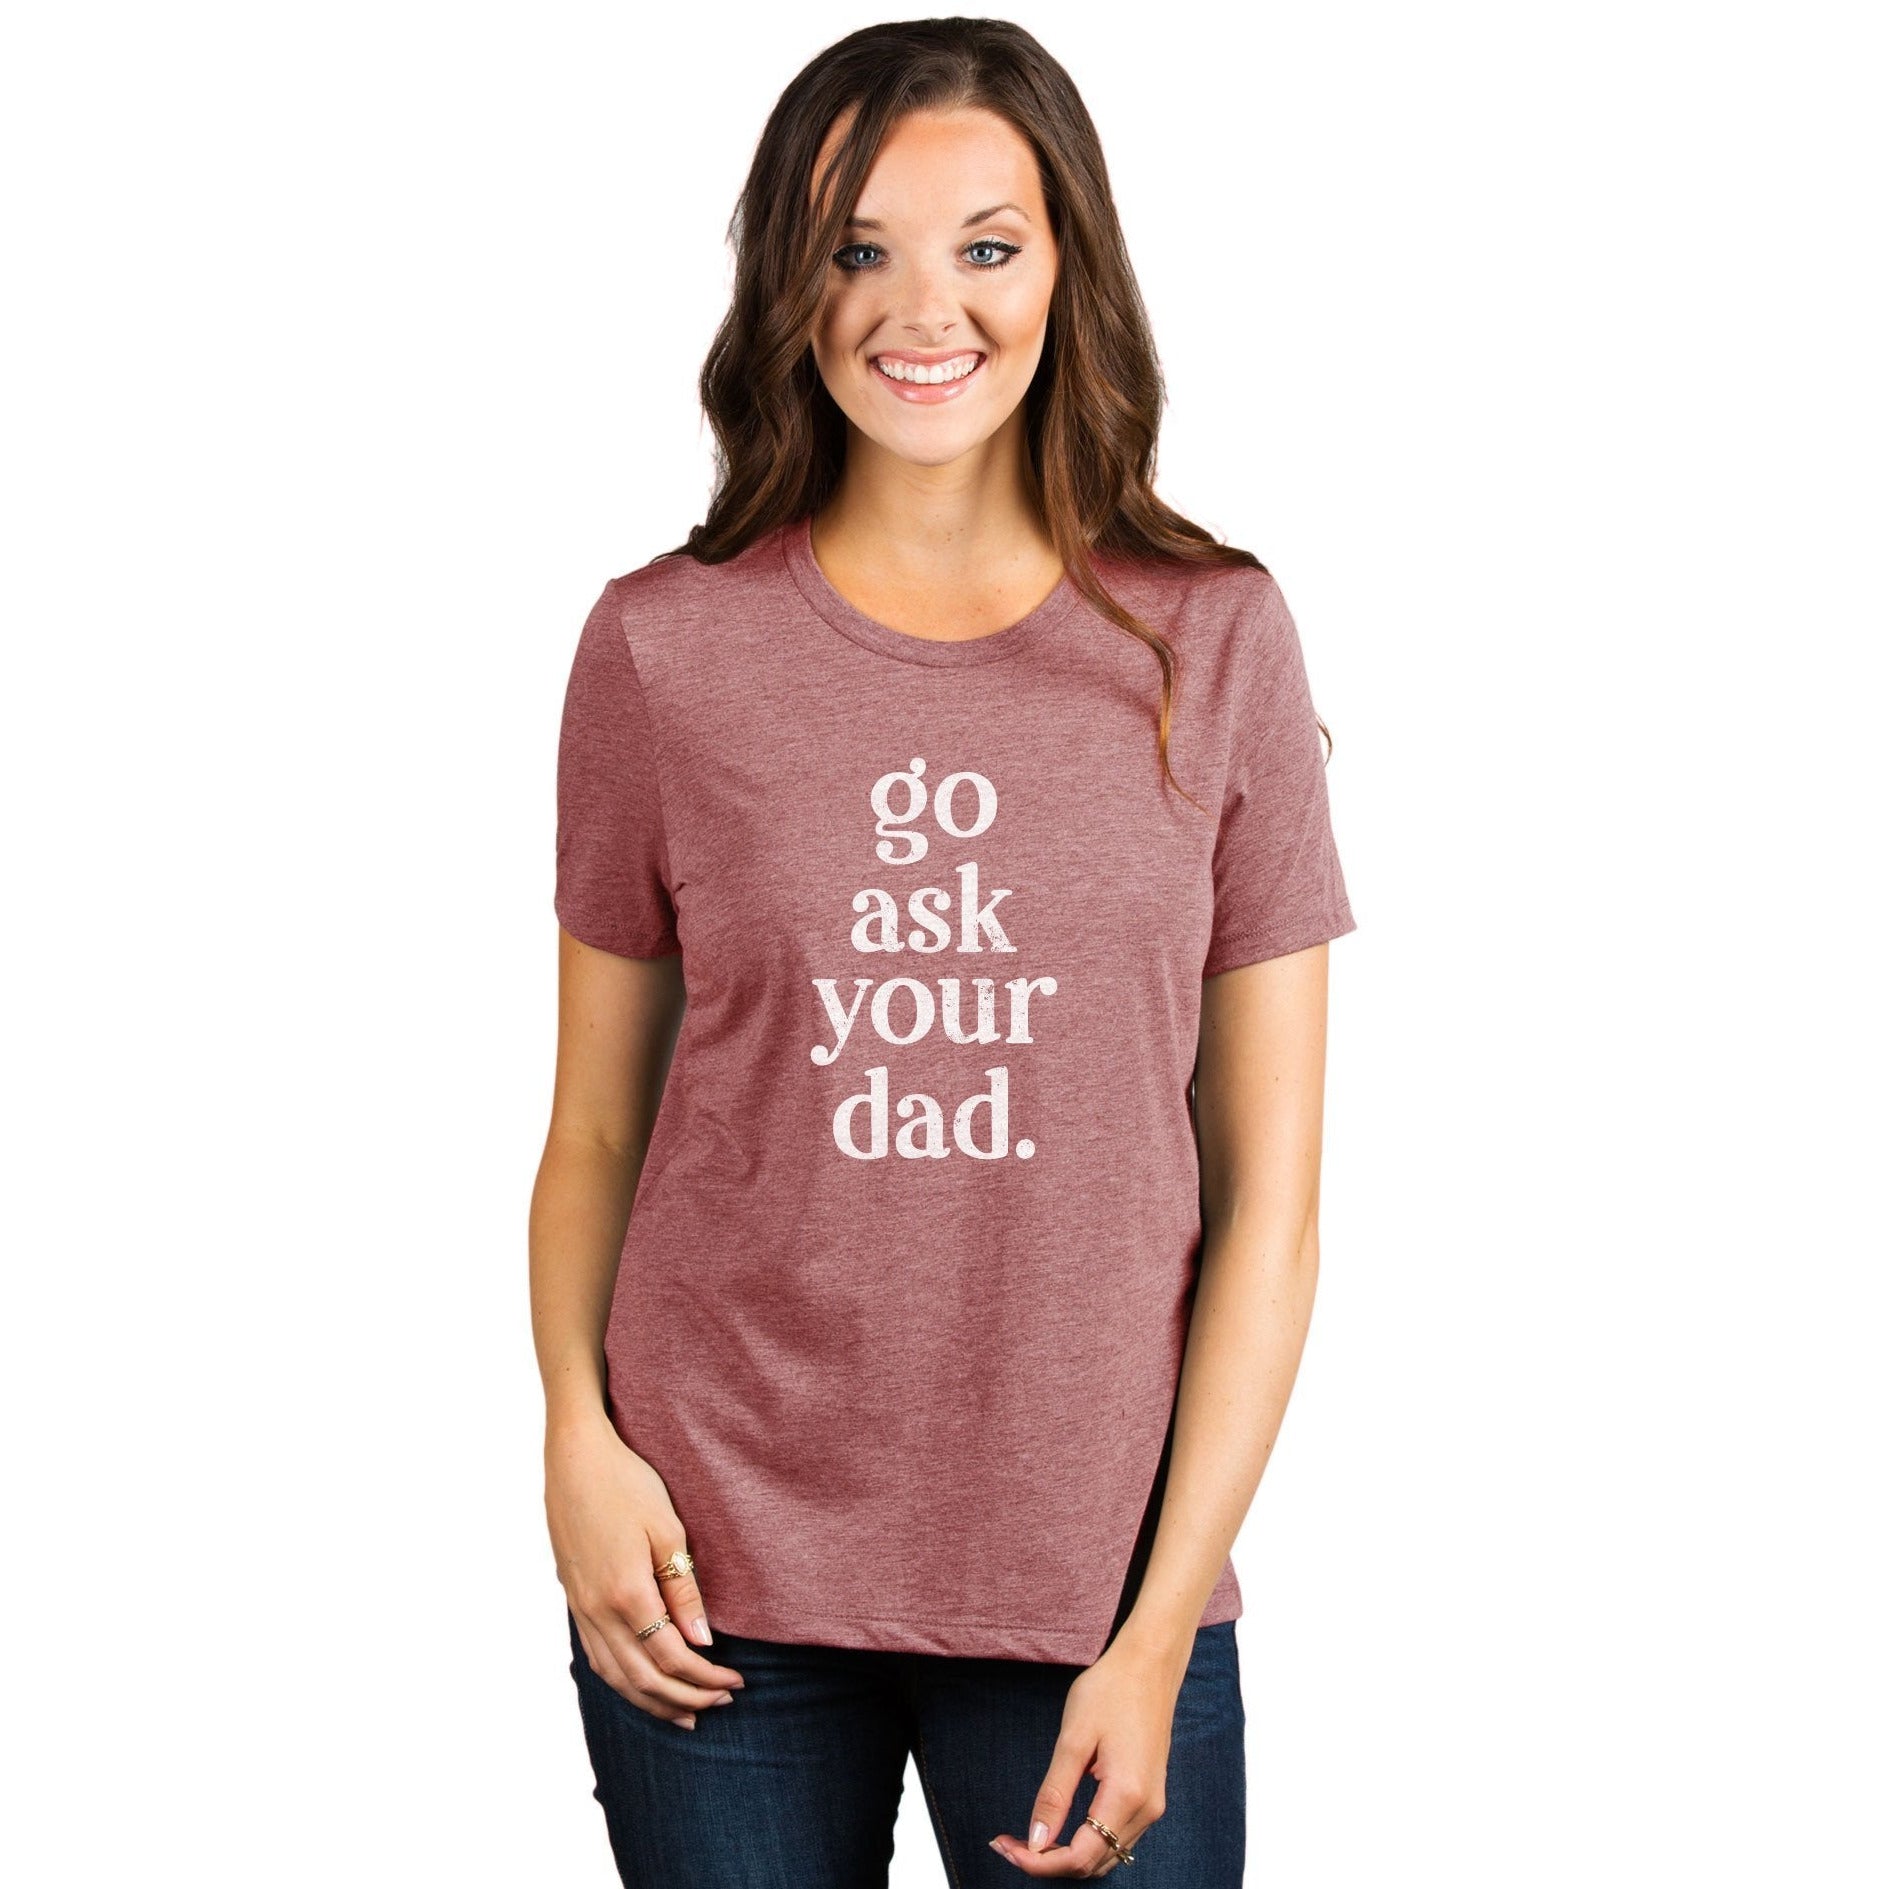 Go Ask Your Dad Women's Relaxed Crewneck T-Shirt Top Tee Heather Rouge Model
